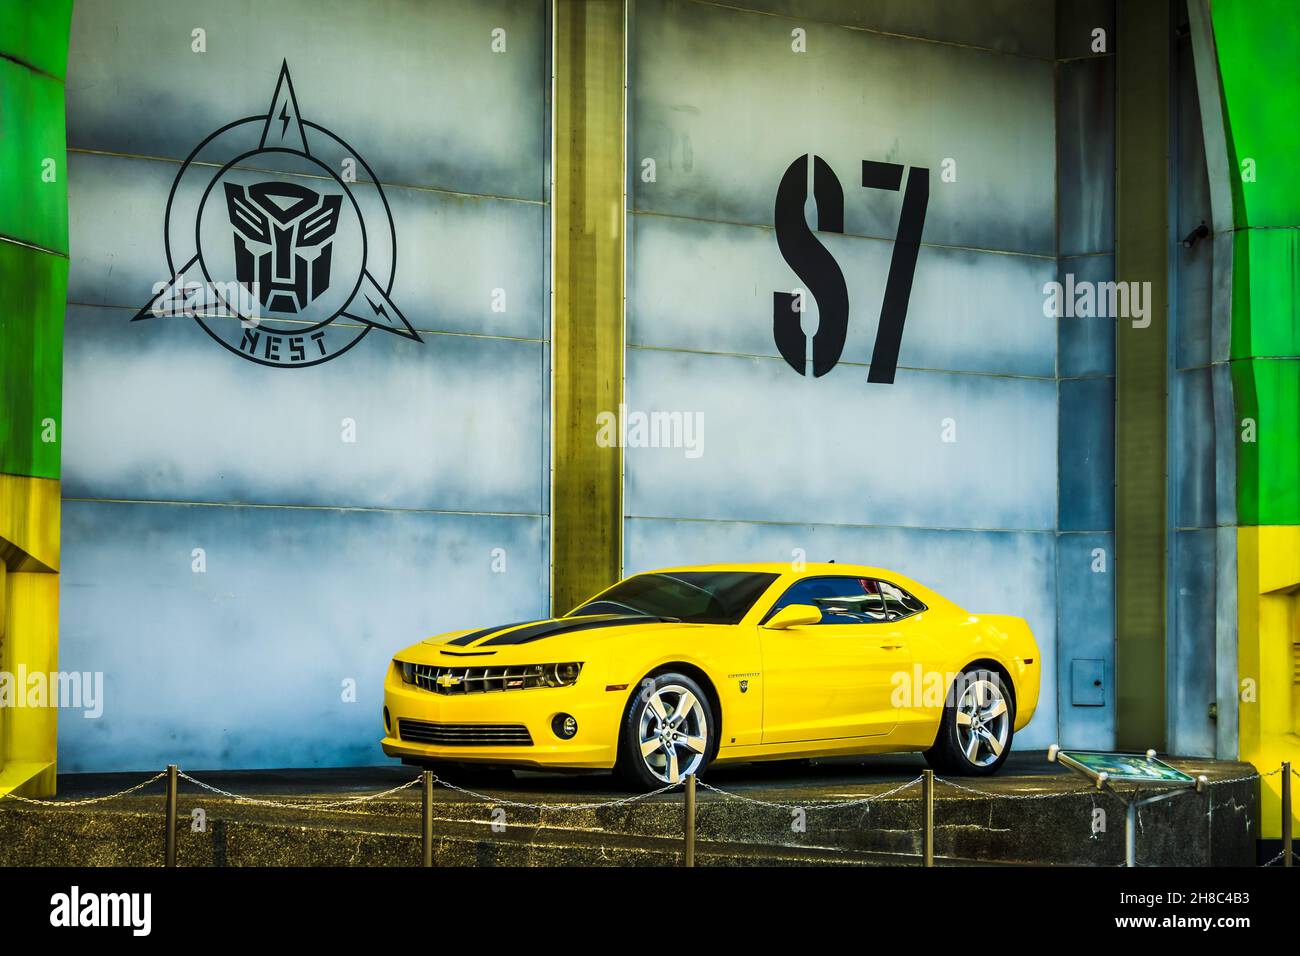 Real Size Yellow Chevrolet Camaro Car or Bumblebee Robot in Transformers Movie on display in Universal Studios Singapore. Stock Photo